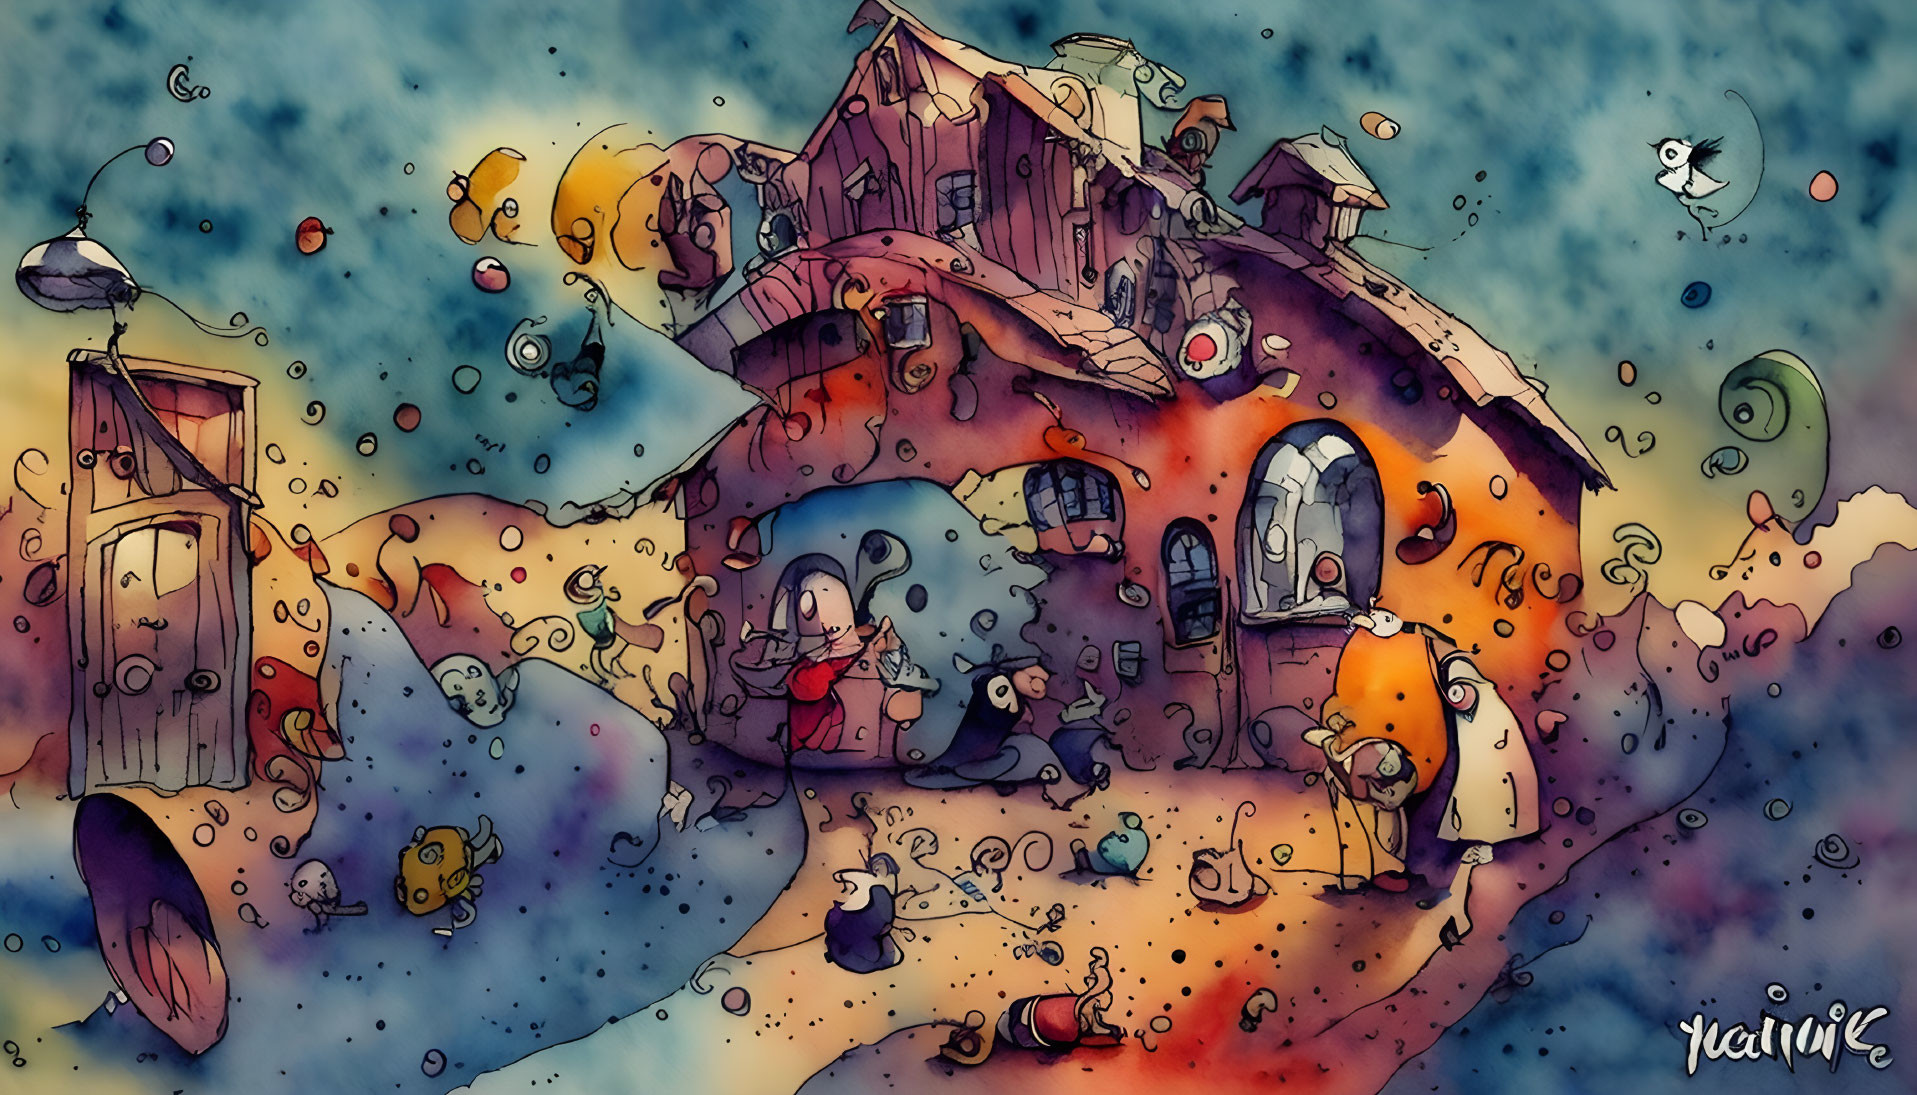 Colorful fantasy illustration with eccentric house, air balloons, and quirky creatures